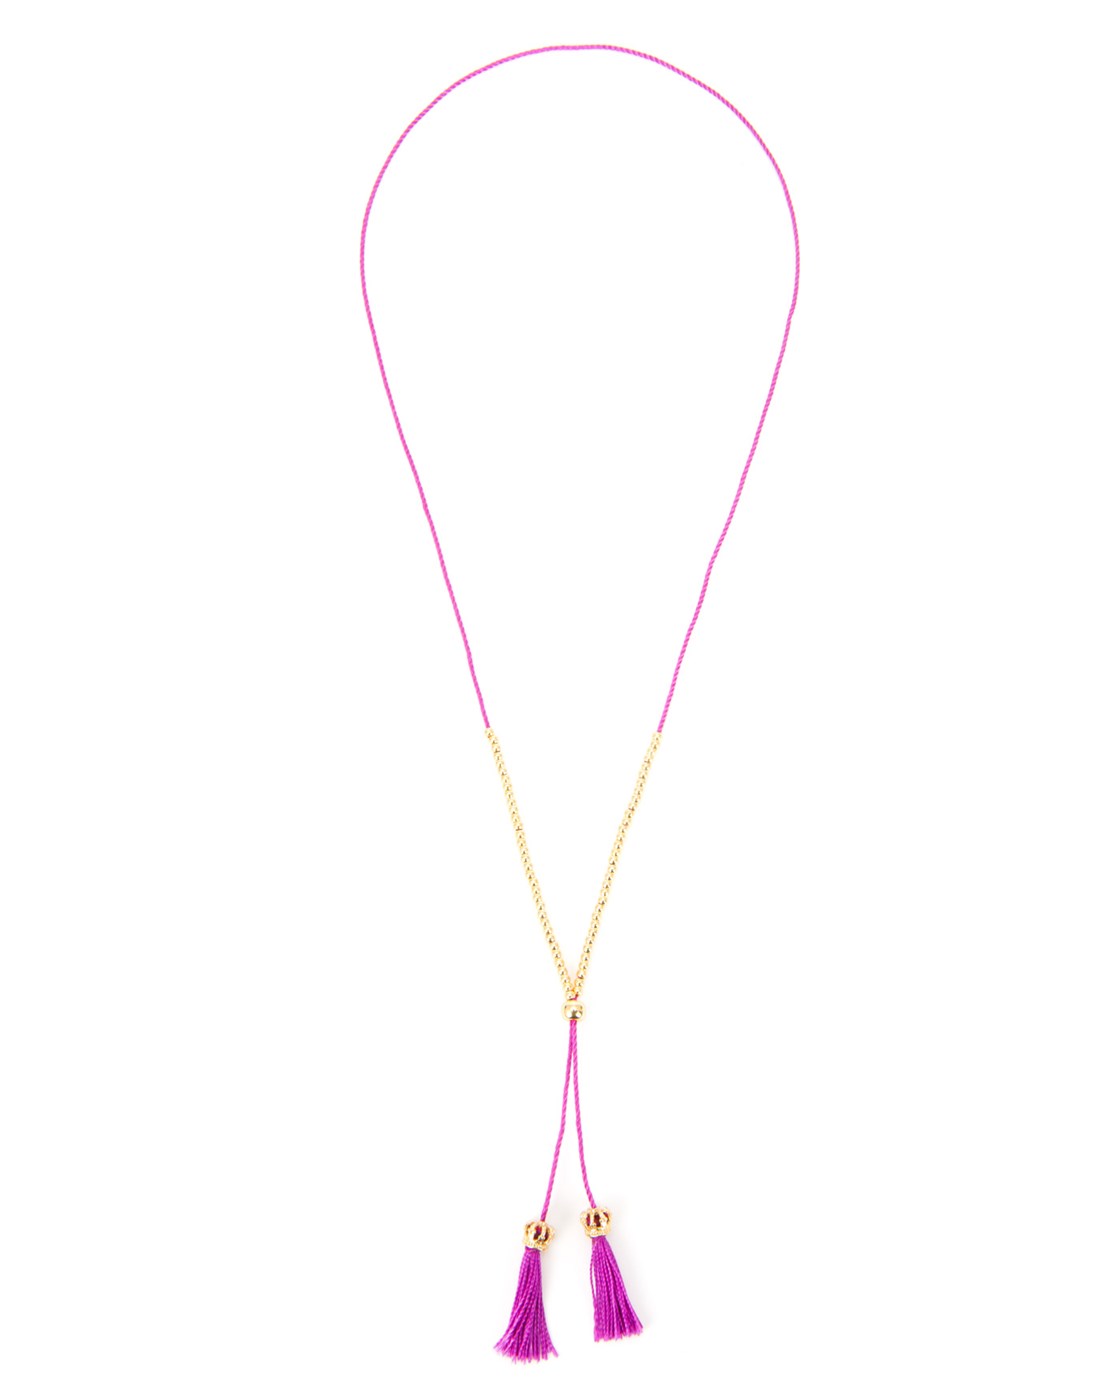 Juicy Couture Beaded Cord Statement Necklace